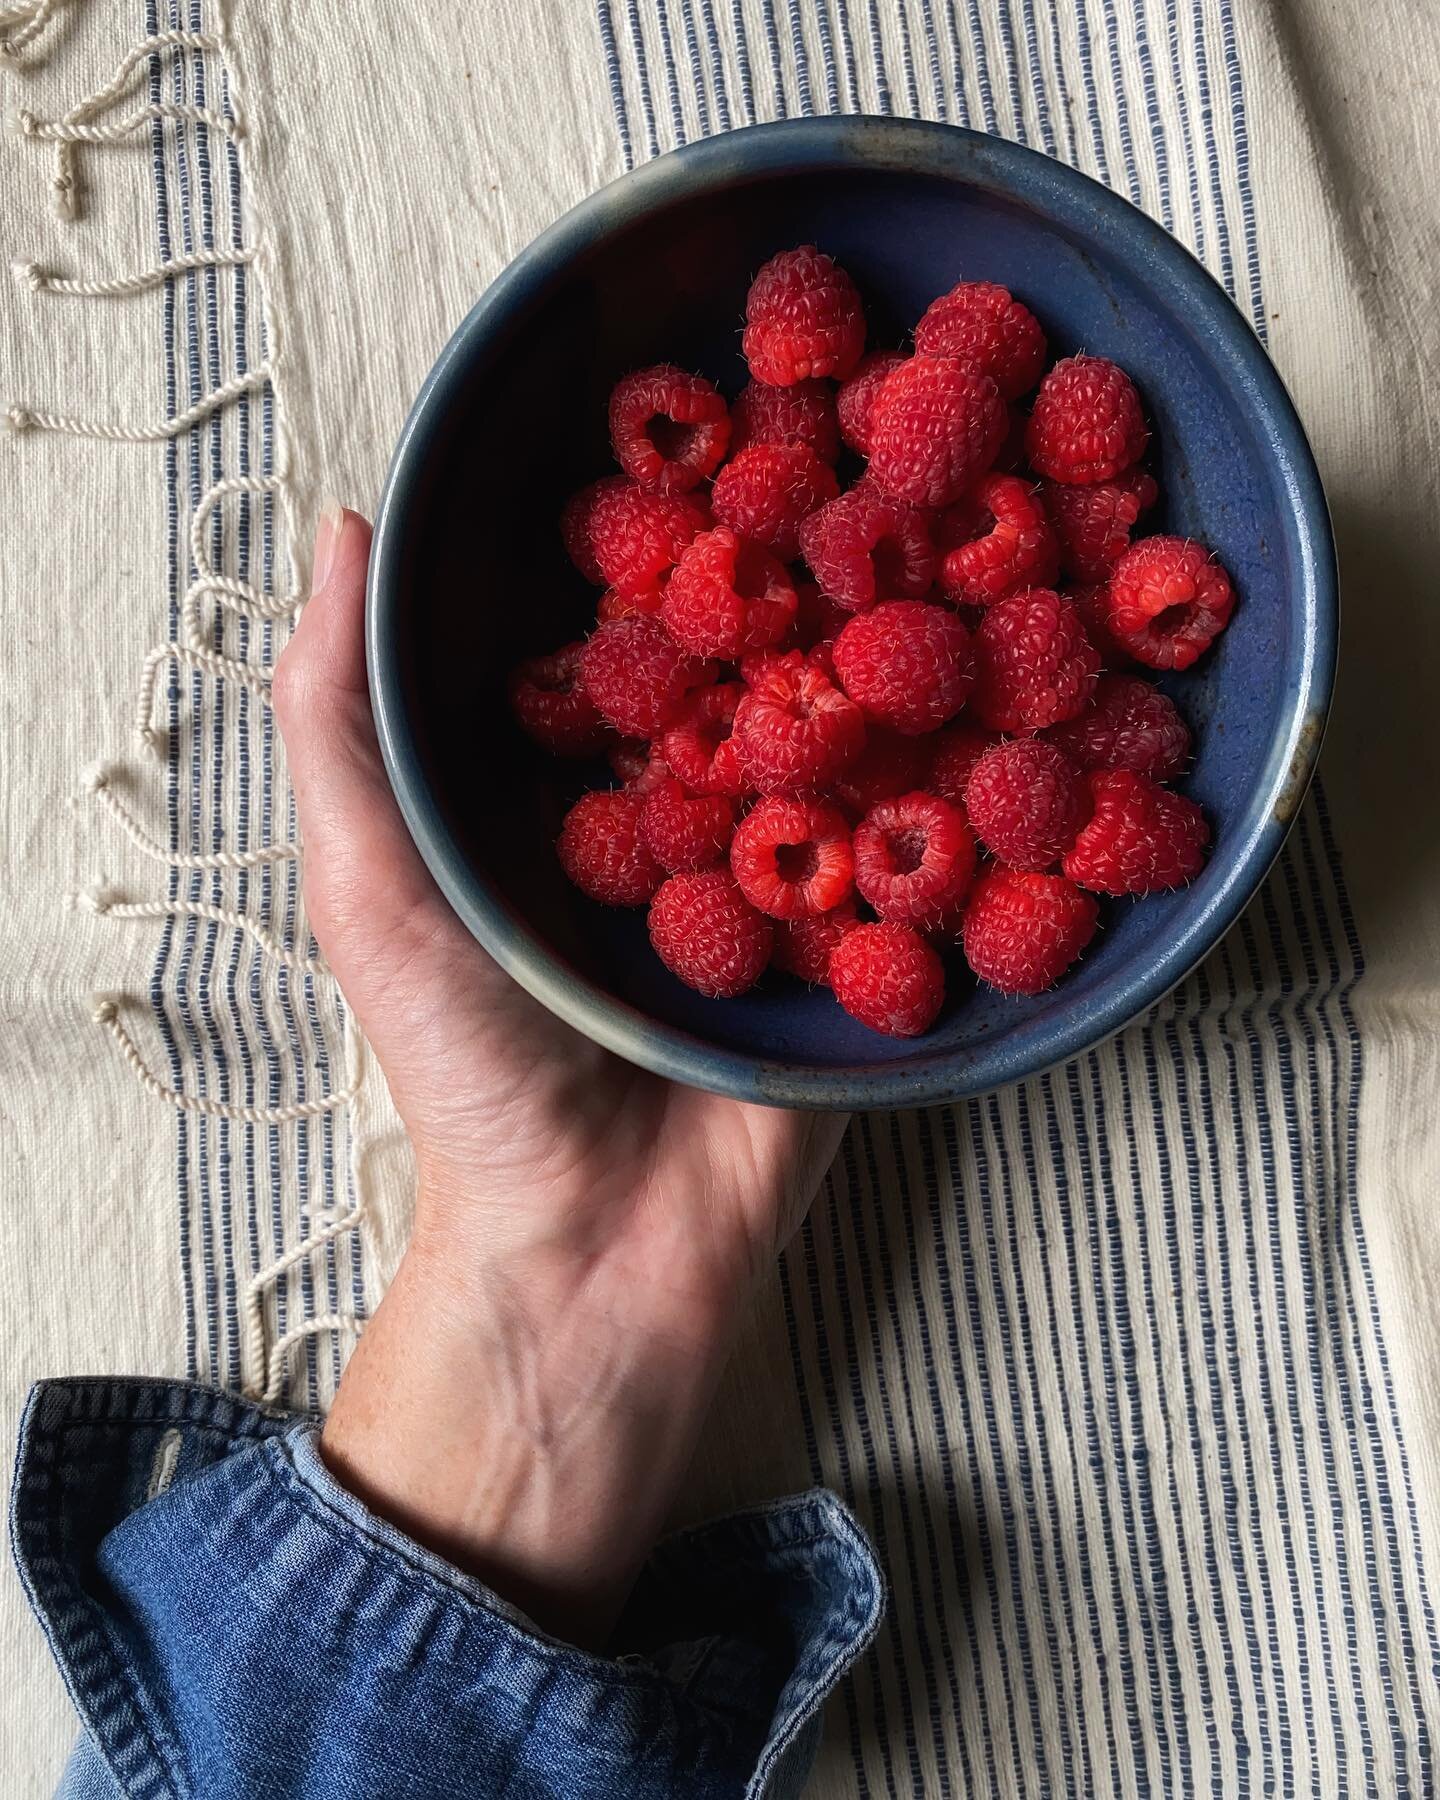 First raspberries of the season&hellip;and coordinating colors for the holiday ❤️